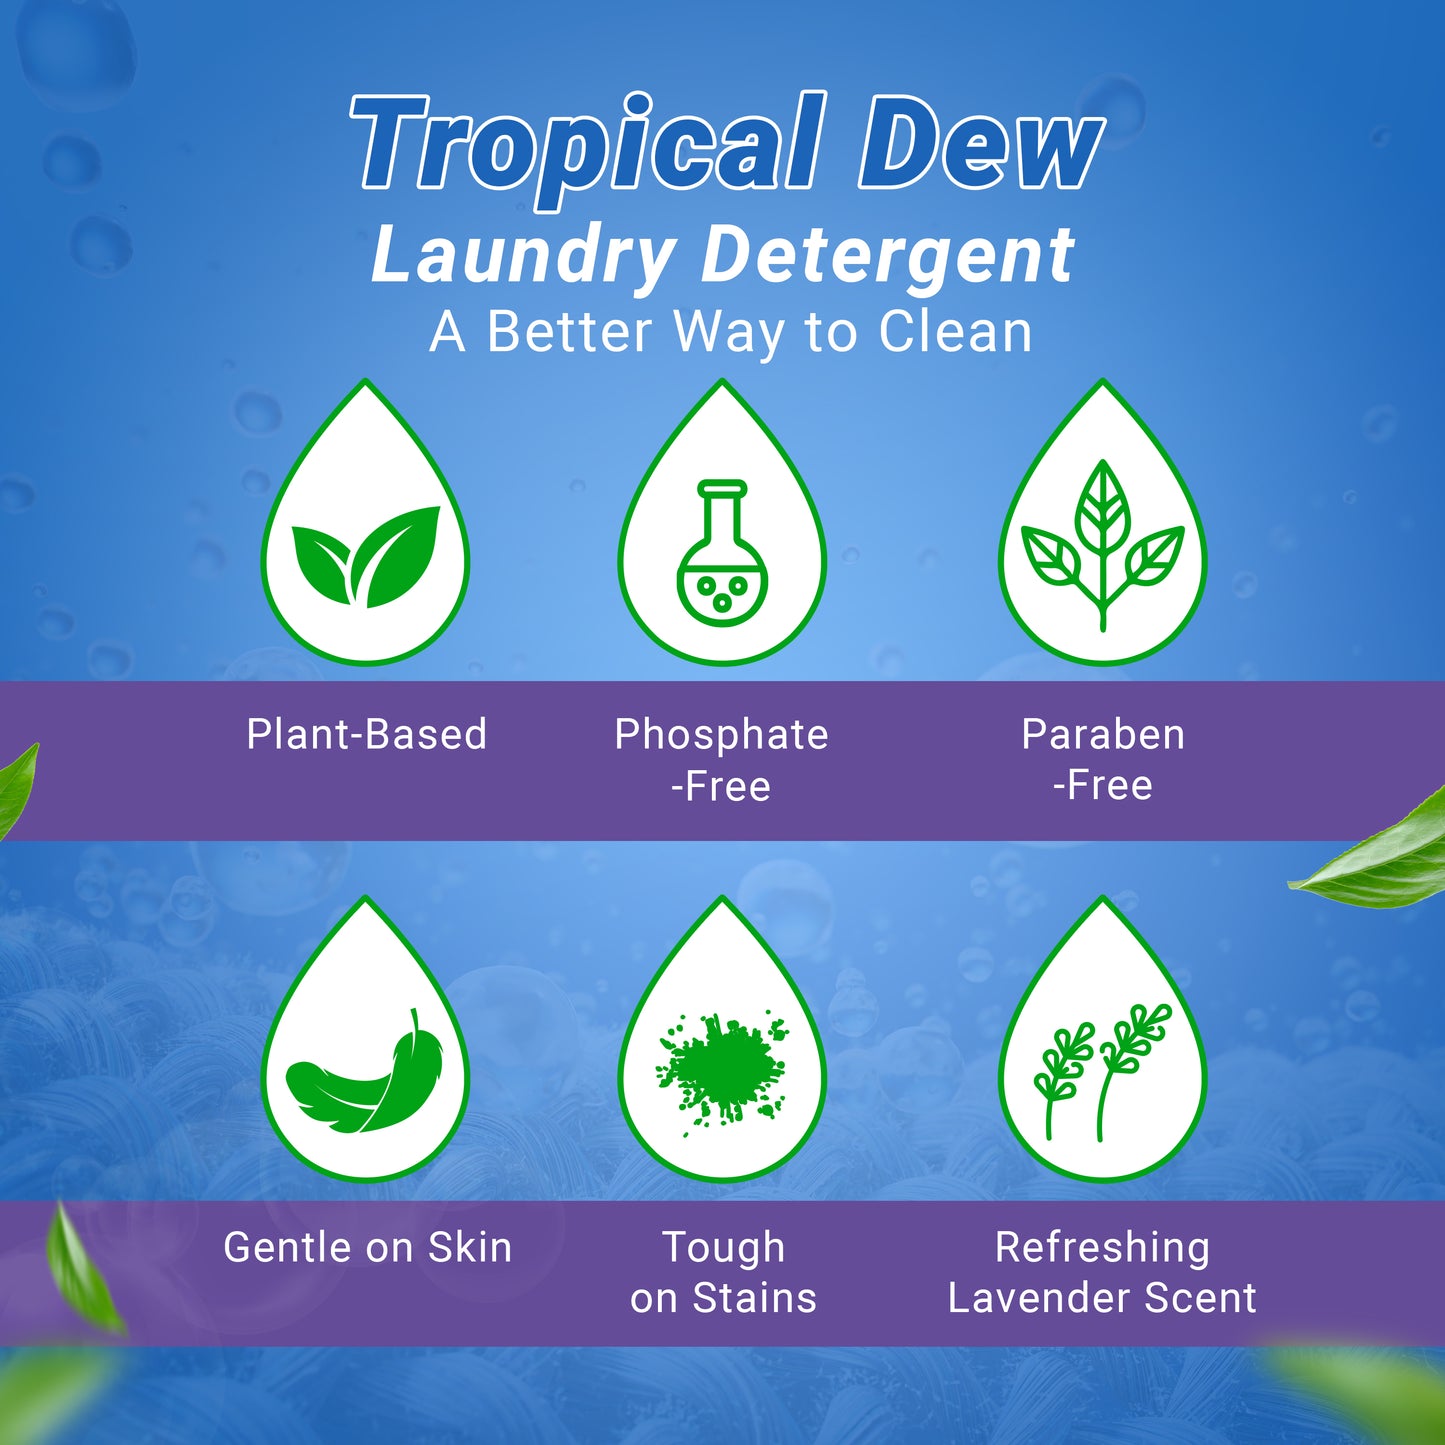 Laundry Soap Liquid Detergent - Phosphate & Paraben Free Natural Detergent with Citric Acid for Stain Removal - For Hand Wash, Front Load & Top Load Washing Machine - Tropical Dew, Lavender Scent, 500ml